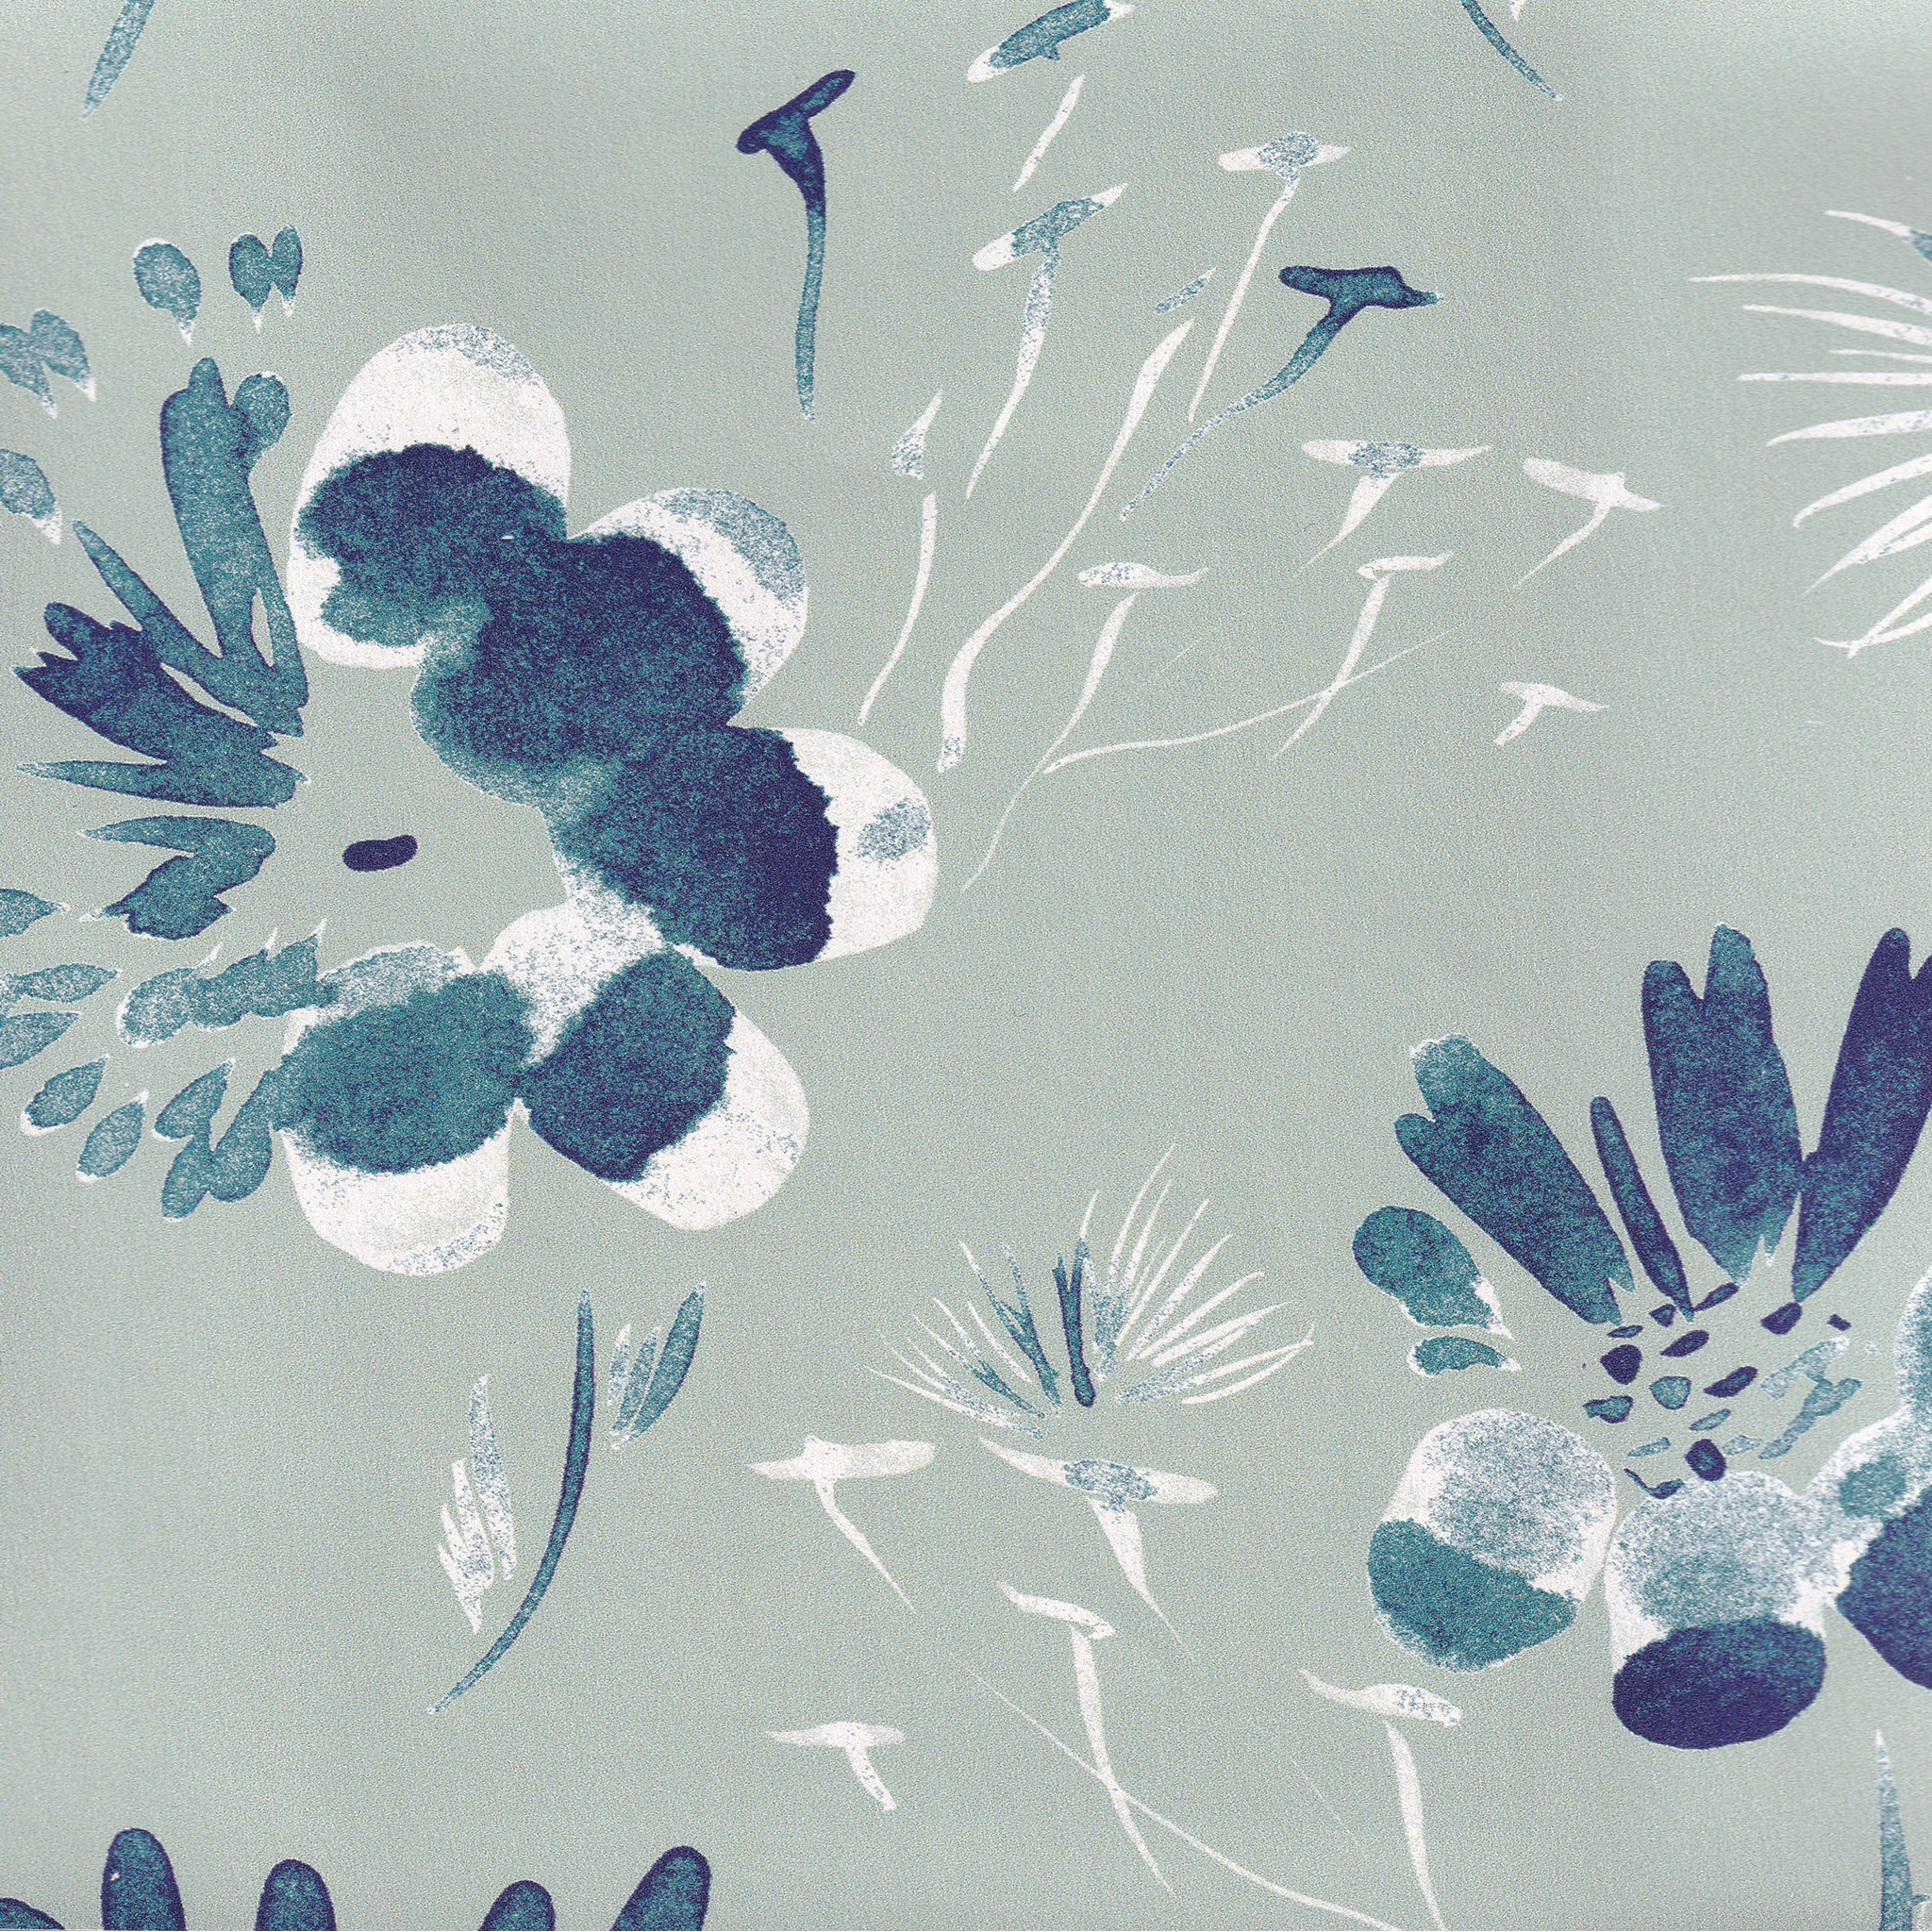 Mint Floral Fabric, Wallpaper and Home Decor